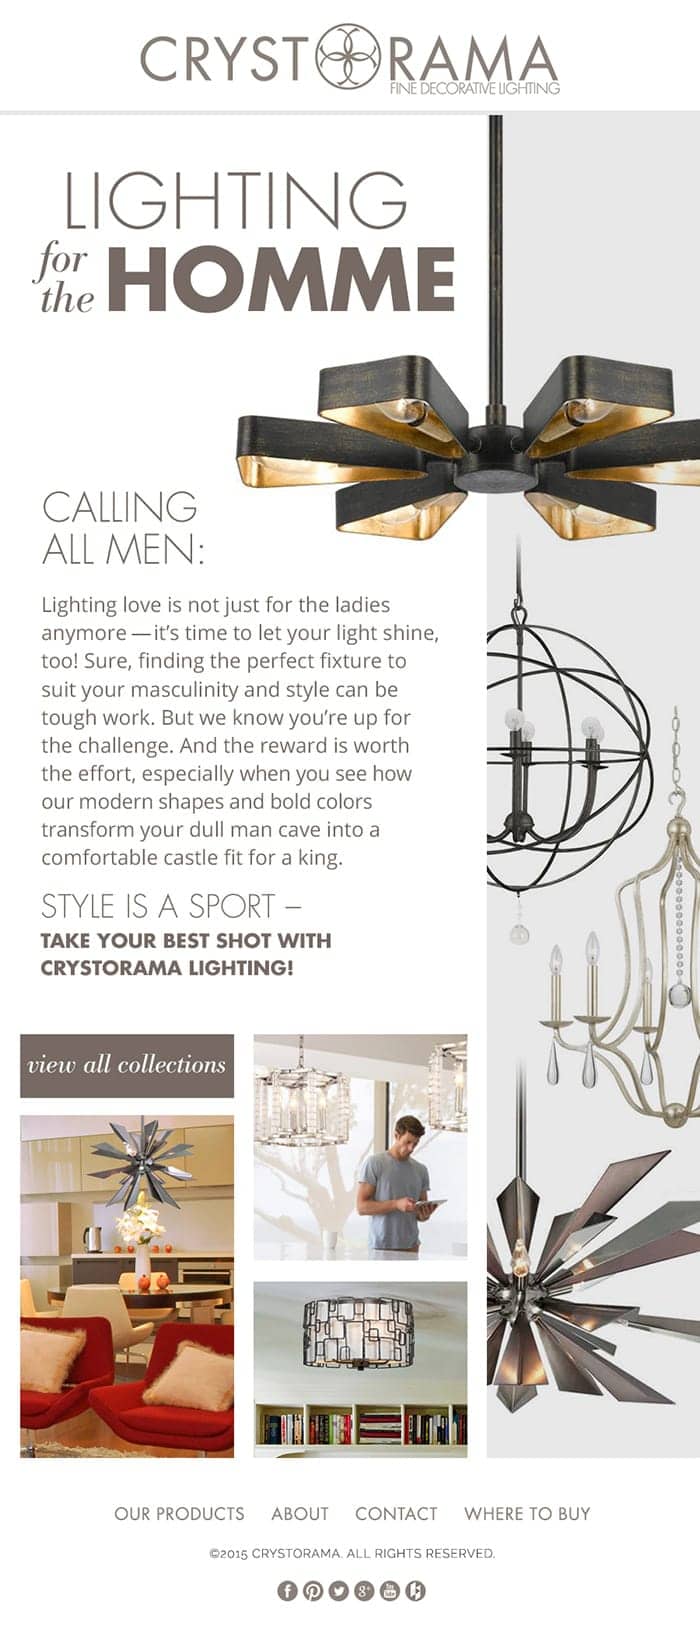 Mens style lighting from the Crystorama website